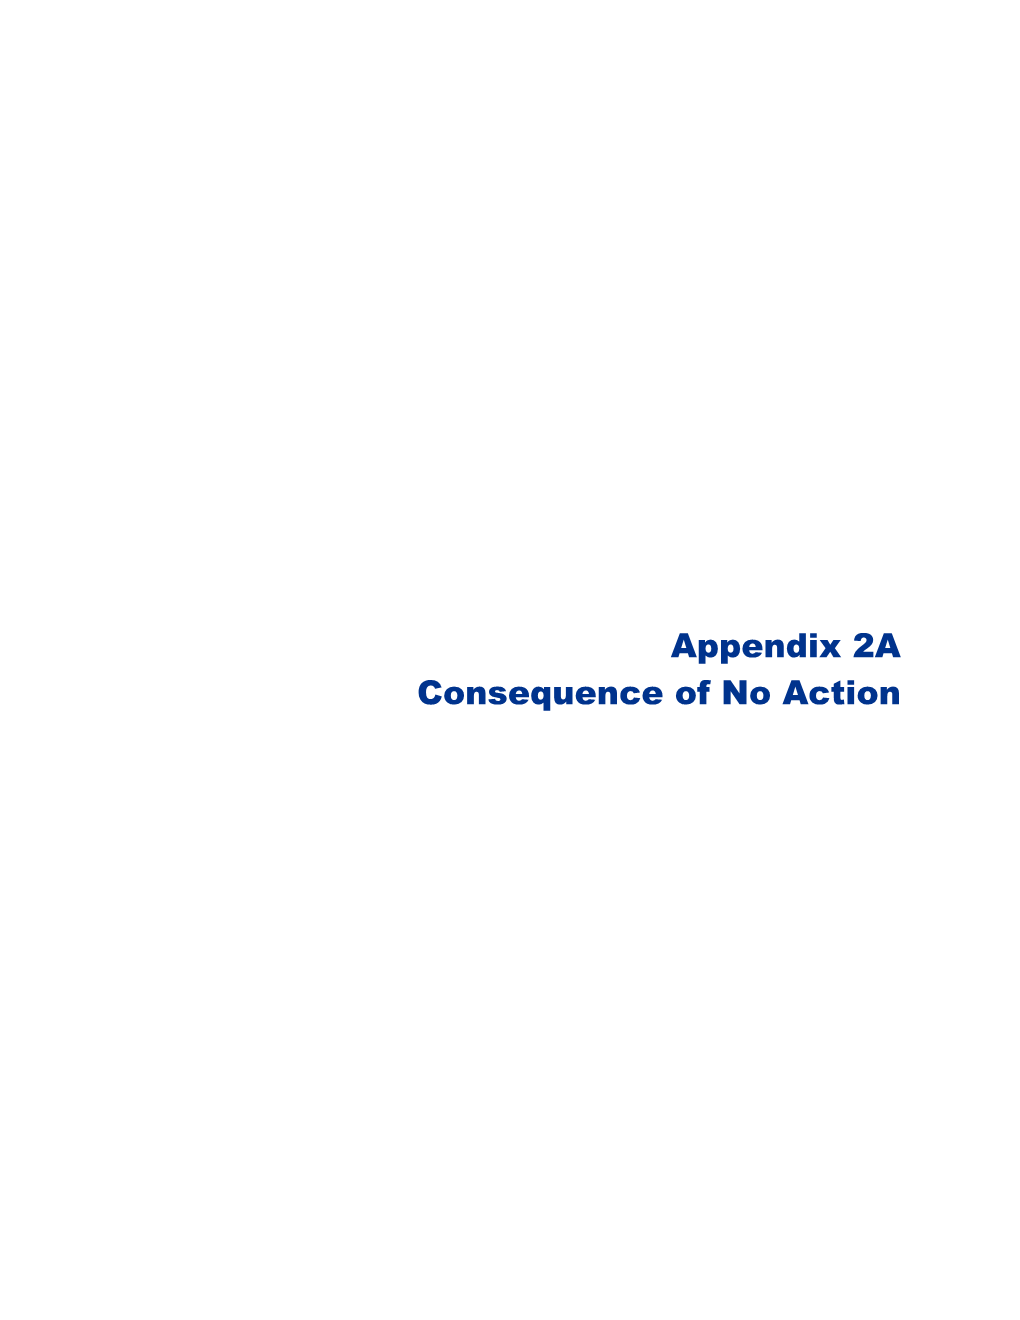 Appendix 2A Consequence of No Action Final Technical